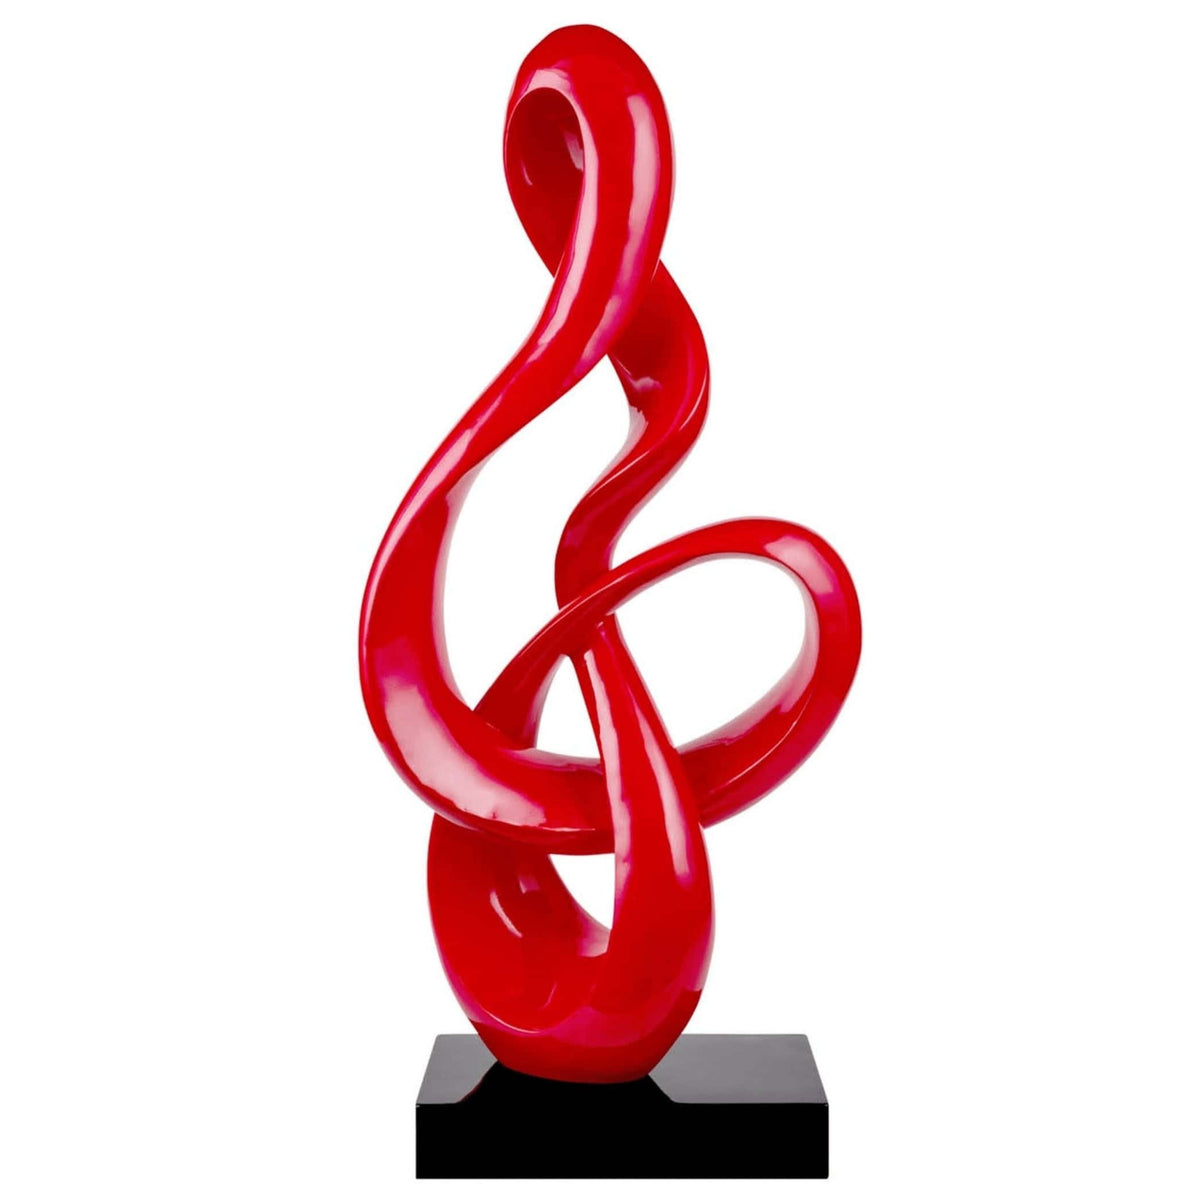 Antilia Treble Abstract Sculpture / Large Red